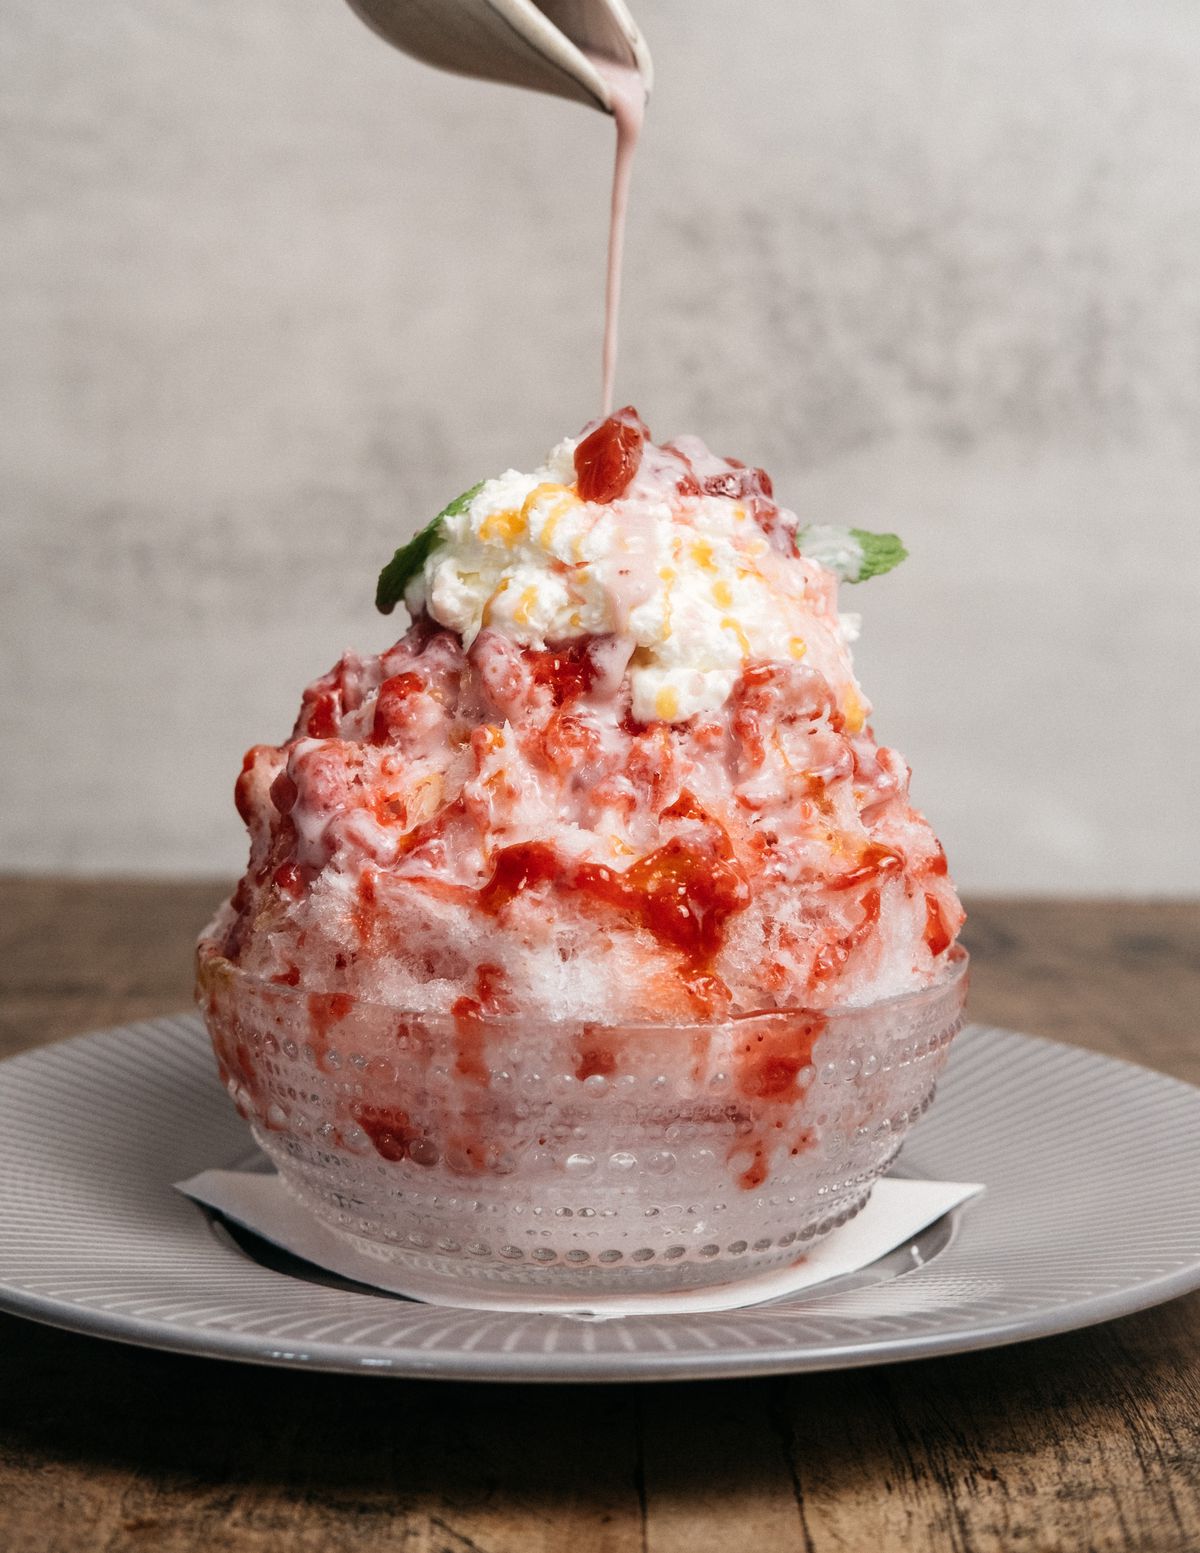 A bowl of katami strawberry kakigori topped with whipped cream, strawberry mint sauce and a drizzle of creamy pink sauce.